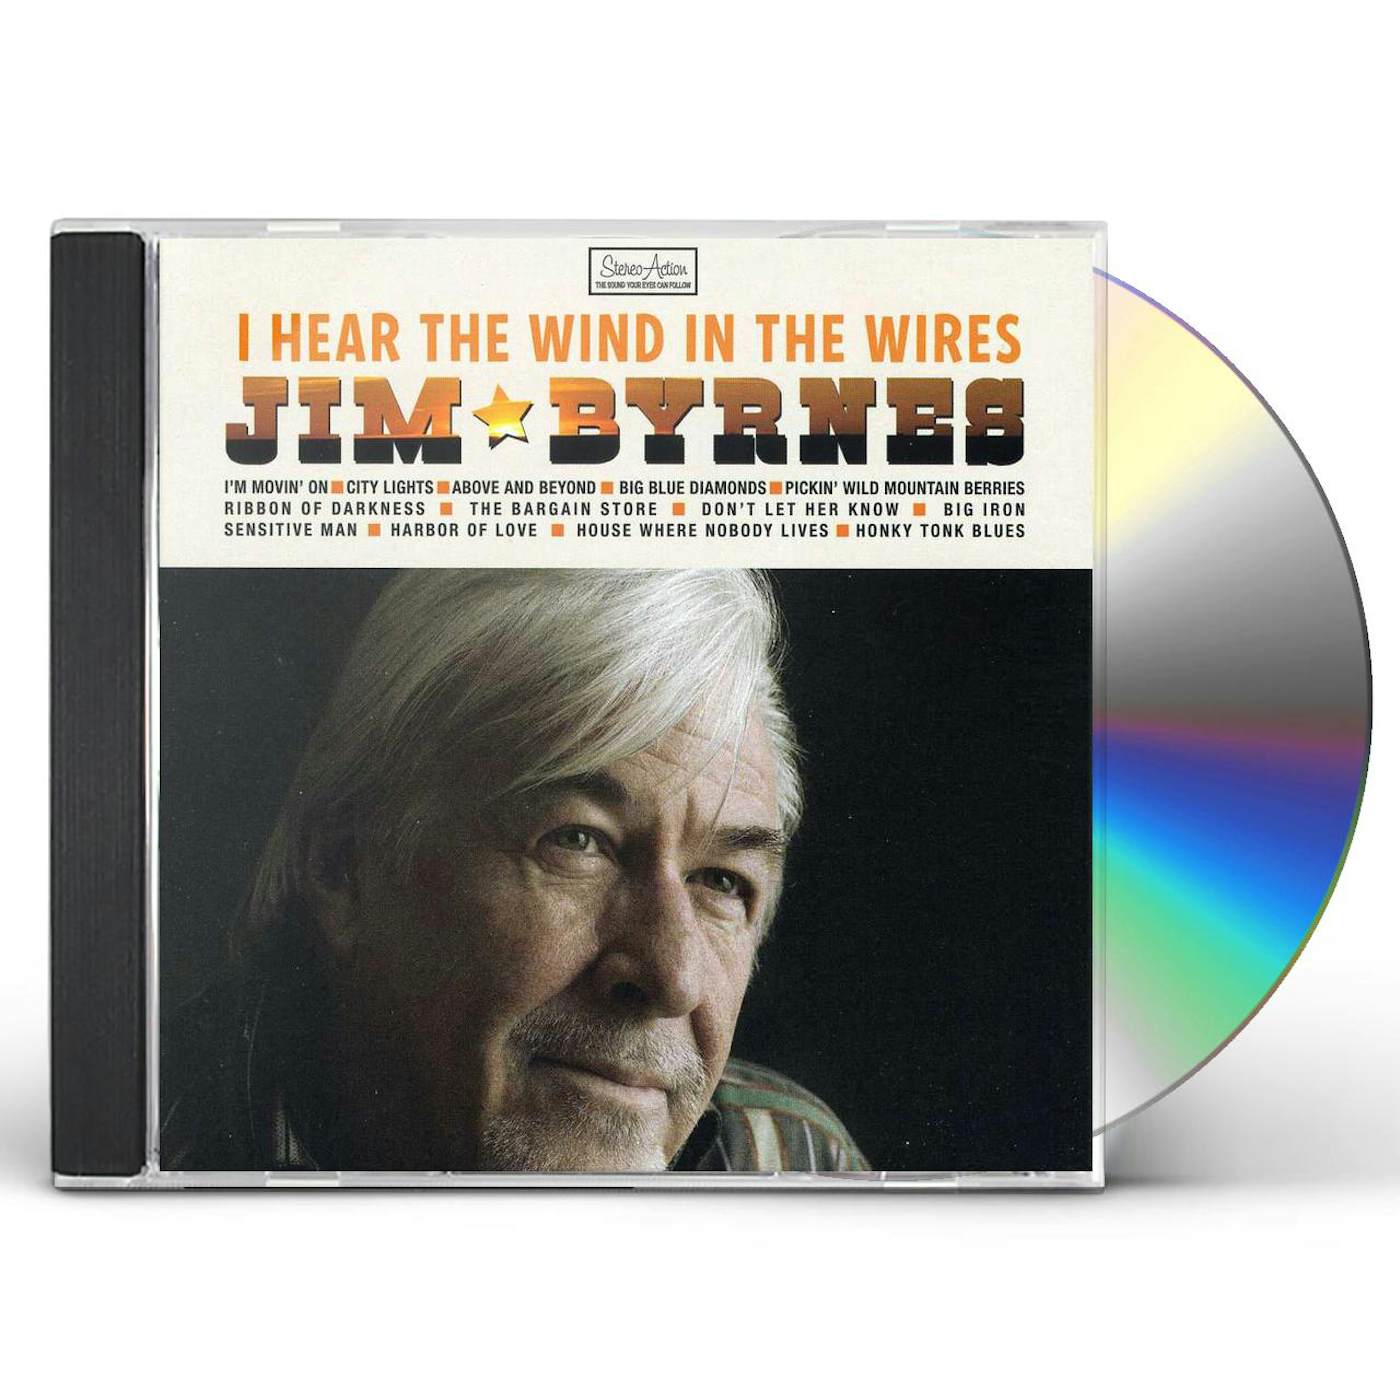 Jim Byrnes I HEAR THE WIND IN THE WIRES CD